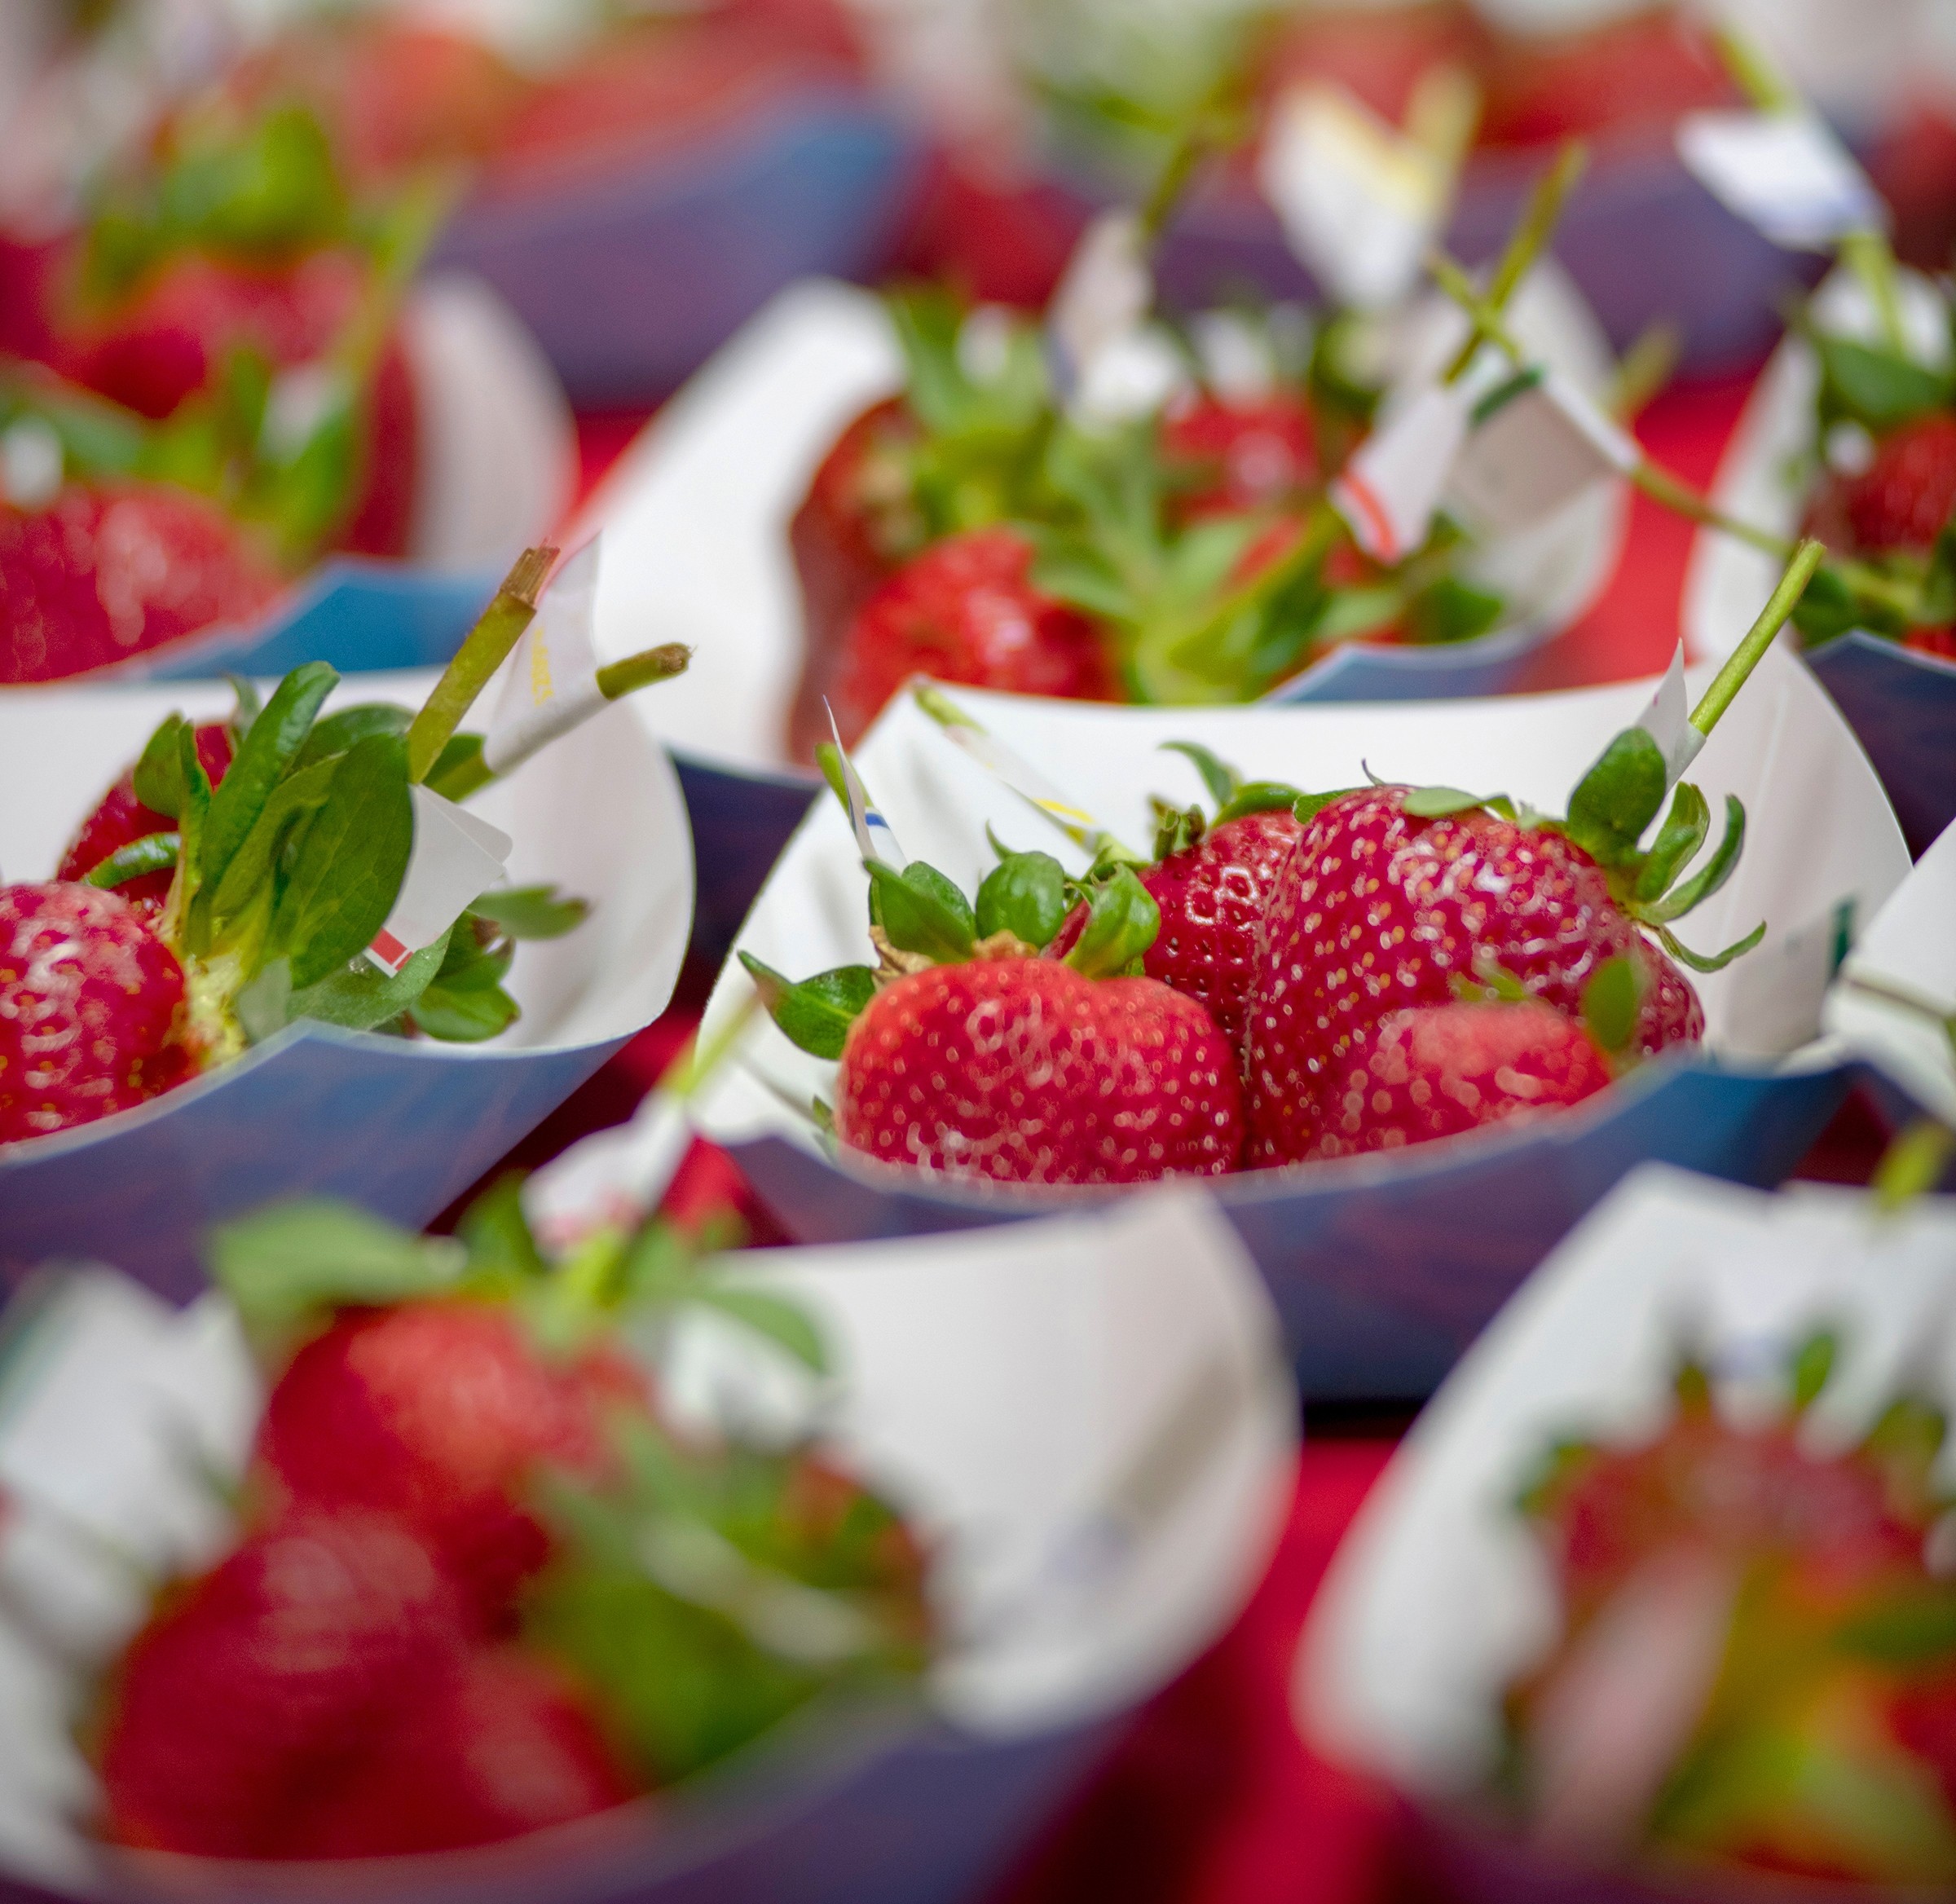 Presale tickets are available for the Santa Maria Strawberry festival's